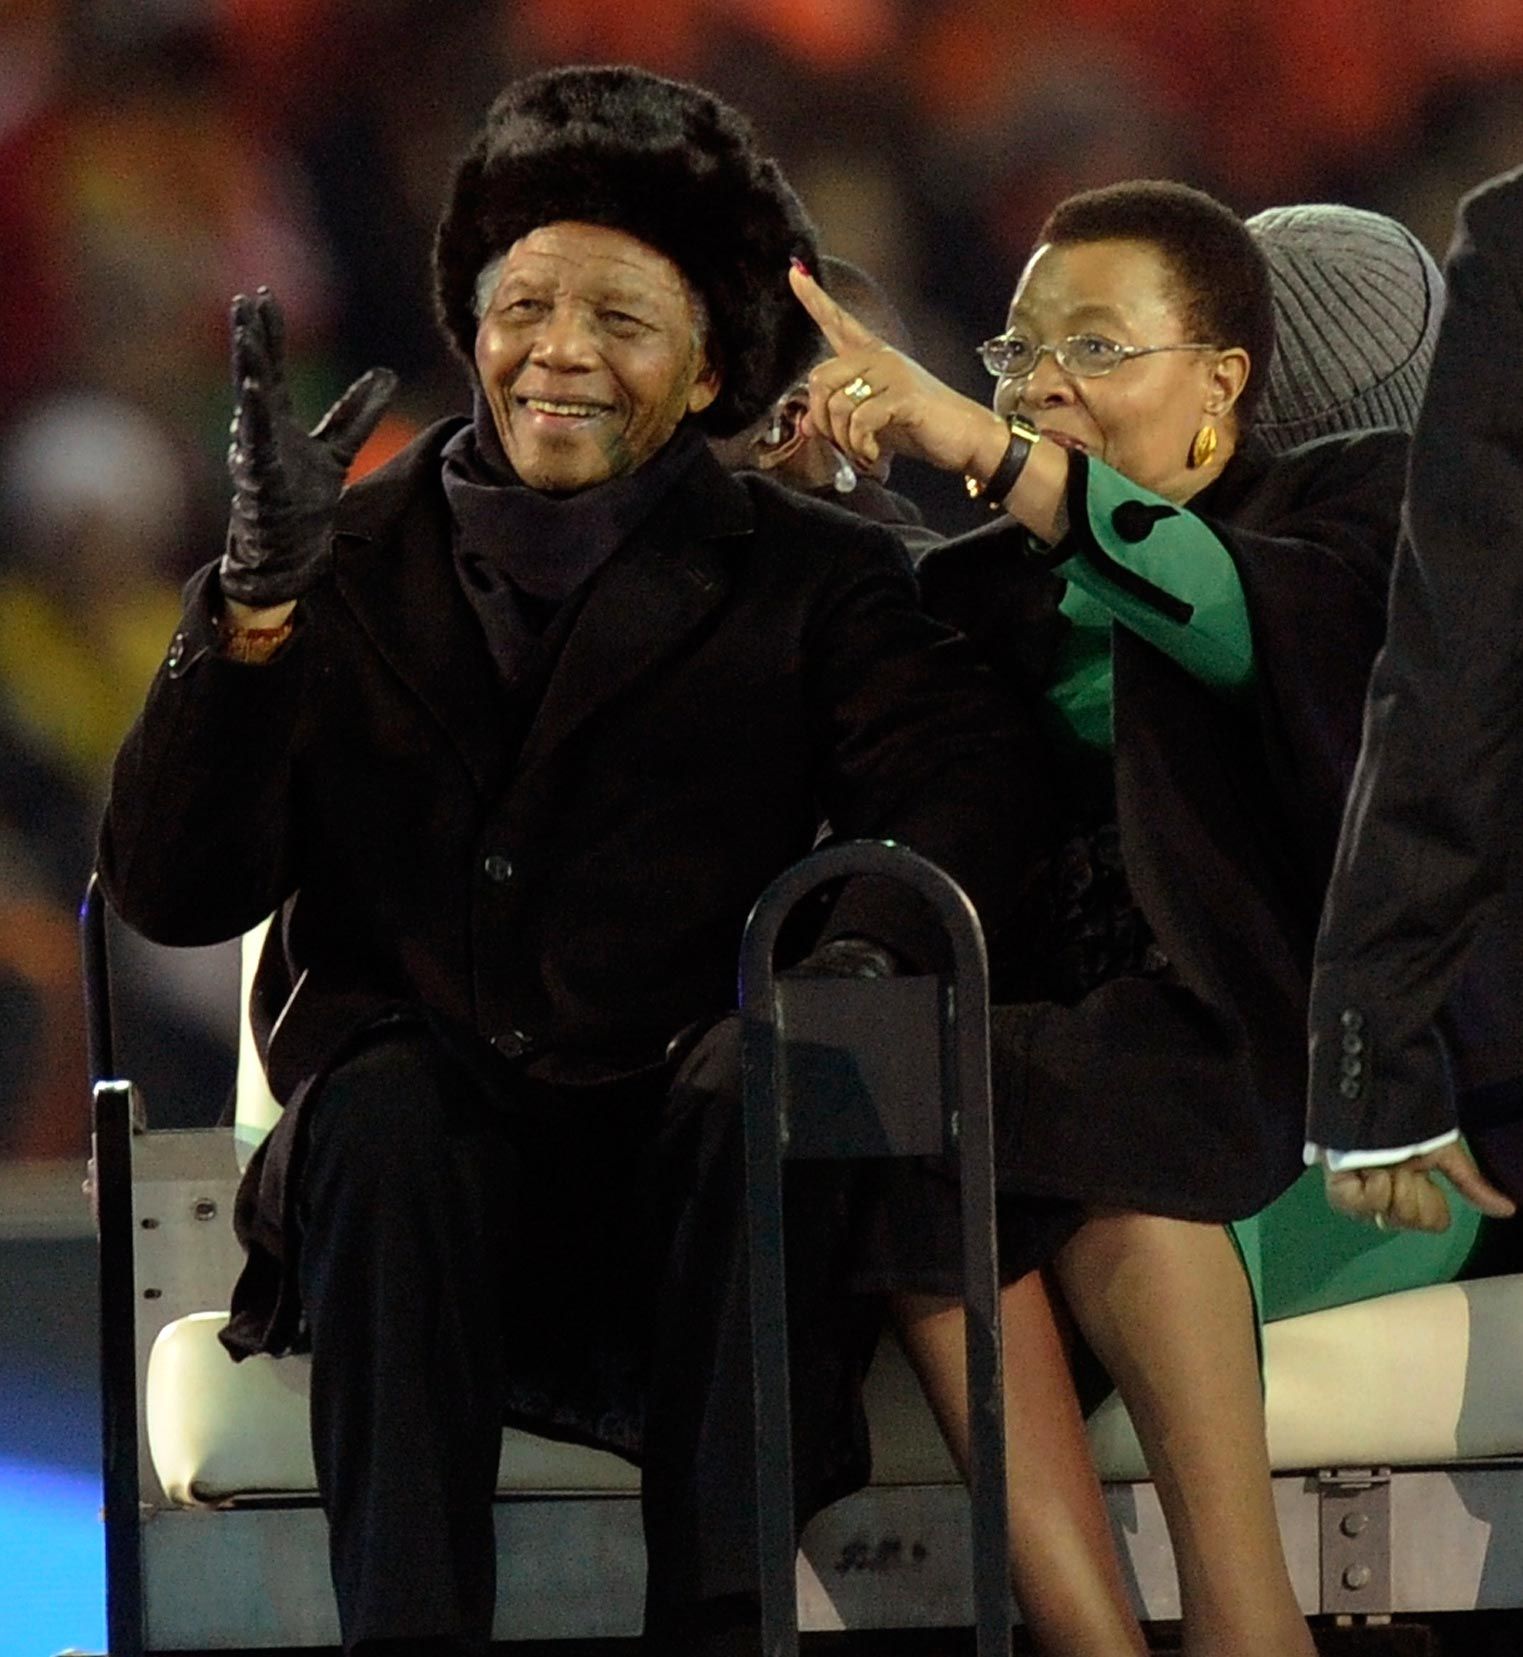 Nelson Mandela and his wife, Graca Machel, are seen ahead of the Soccer World Cup final at Soccer City in Johannesburg on Sunday. (Martin Meissner, AP)